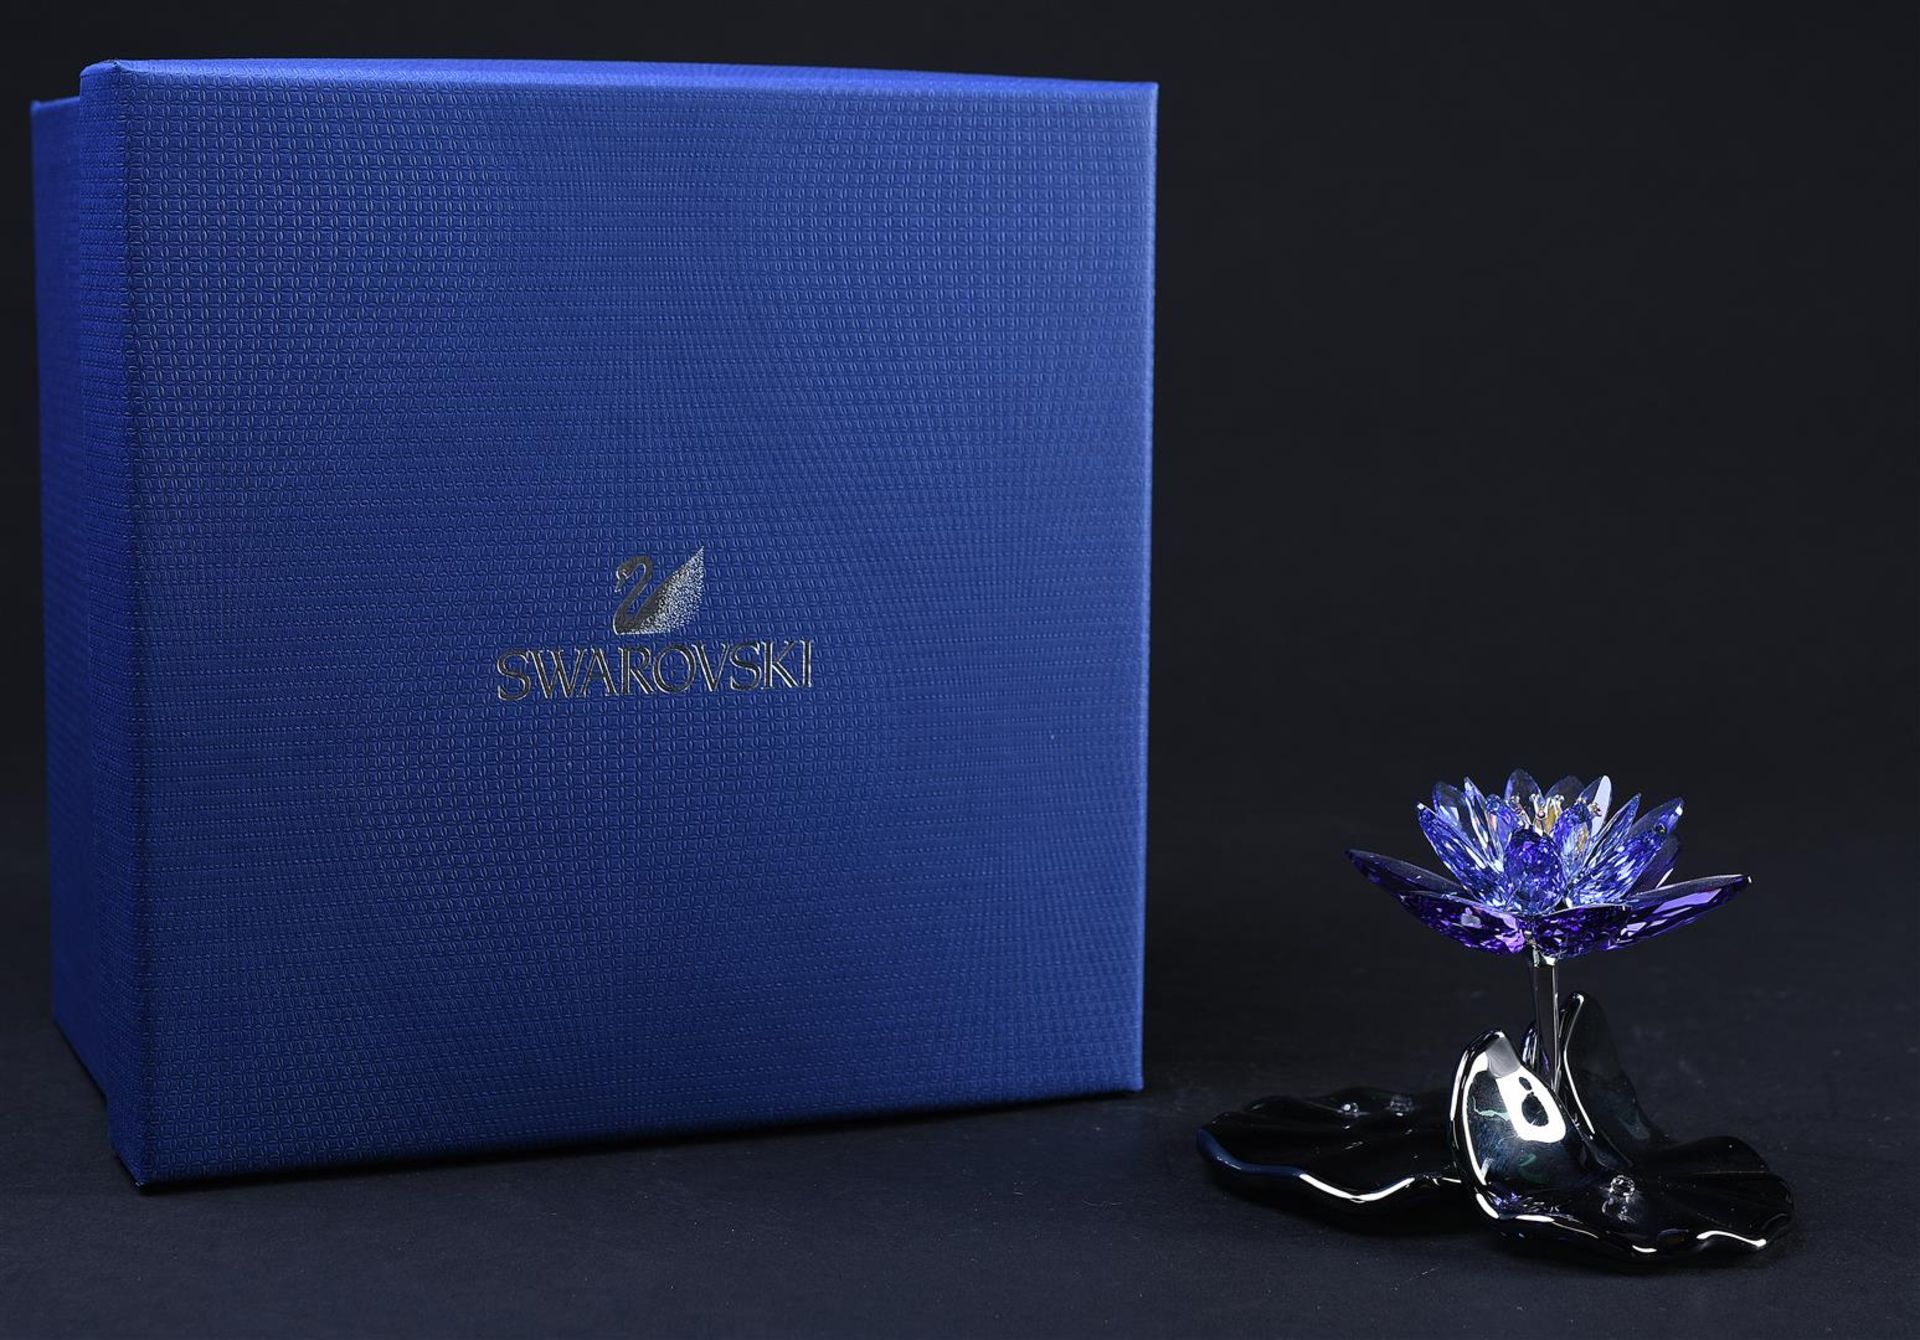 Swarovski, Water Lily - Blue Violet, Year of issue 2012, 1141630. Includes original box.
7.3 x 10.8  - Image 4 of 4